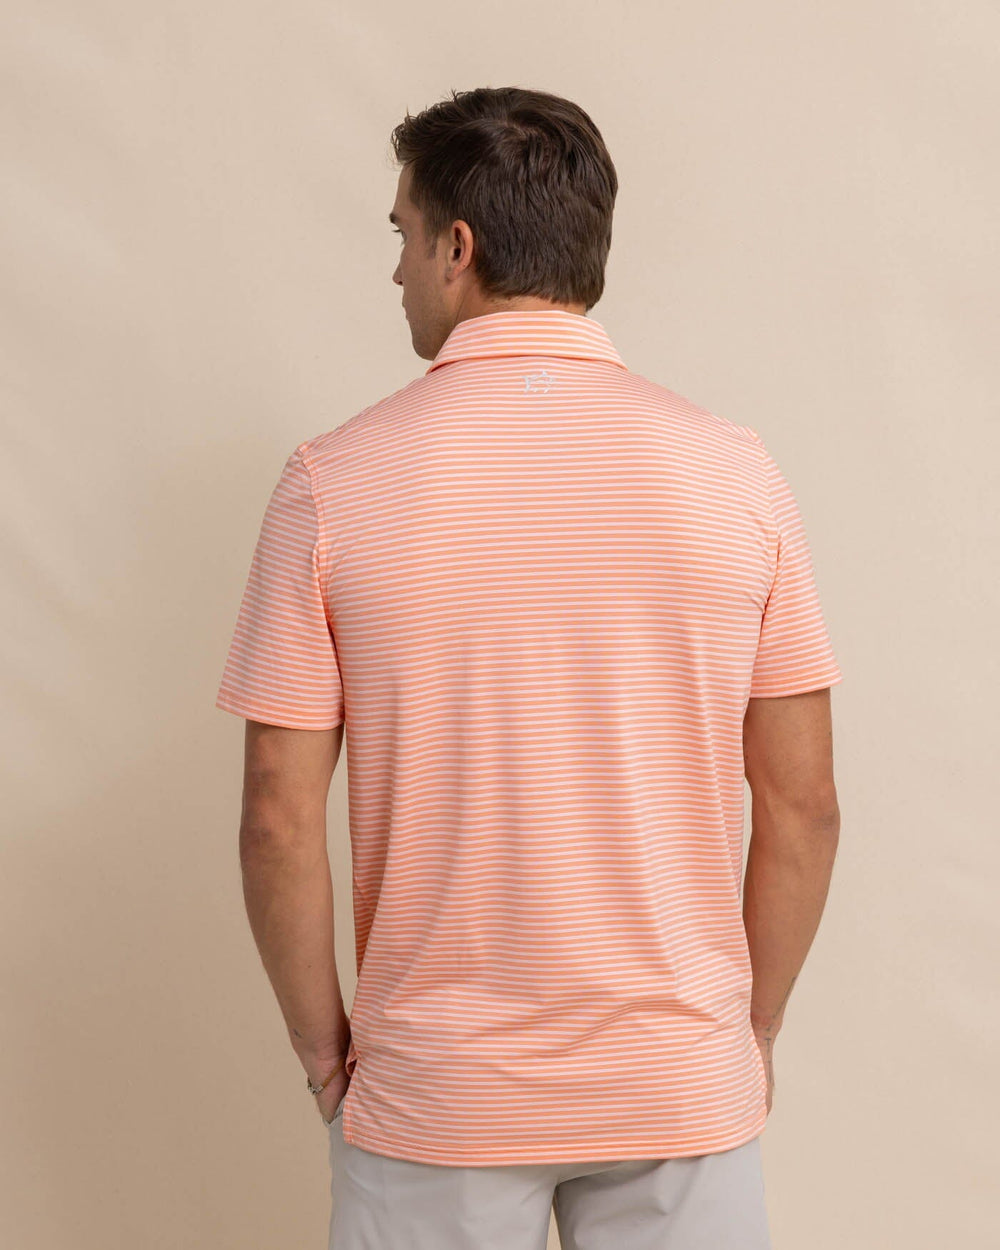 The back view of the Southern Tide brrr eeze Beattie Stripe Performance Polo by Southern Tide - Desert Flower Coral